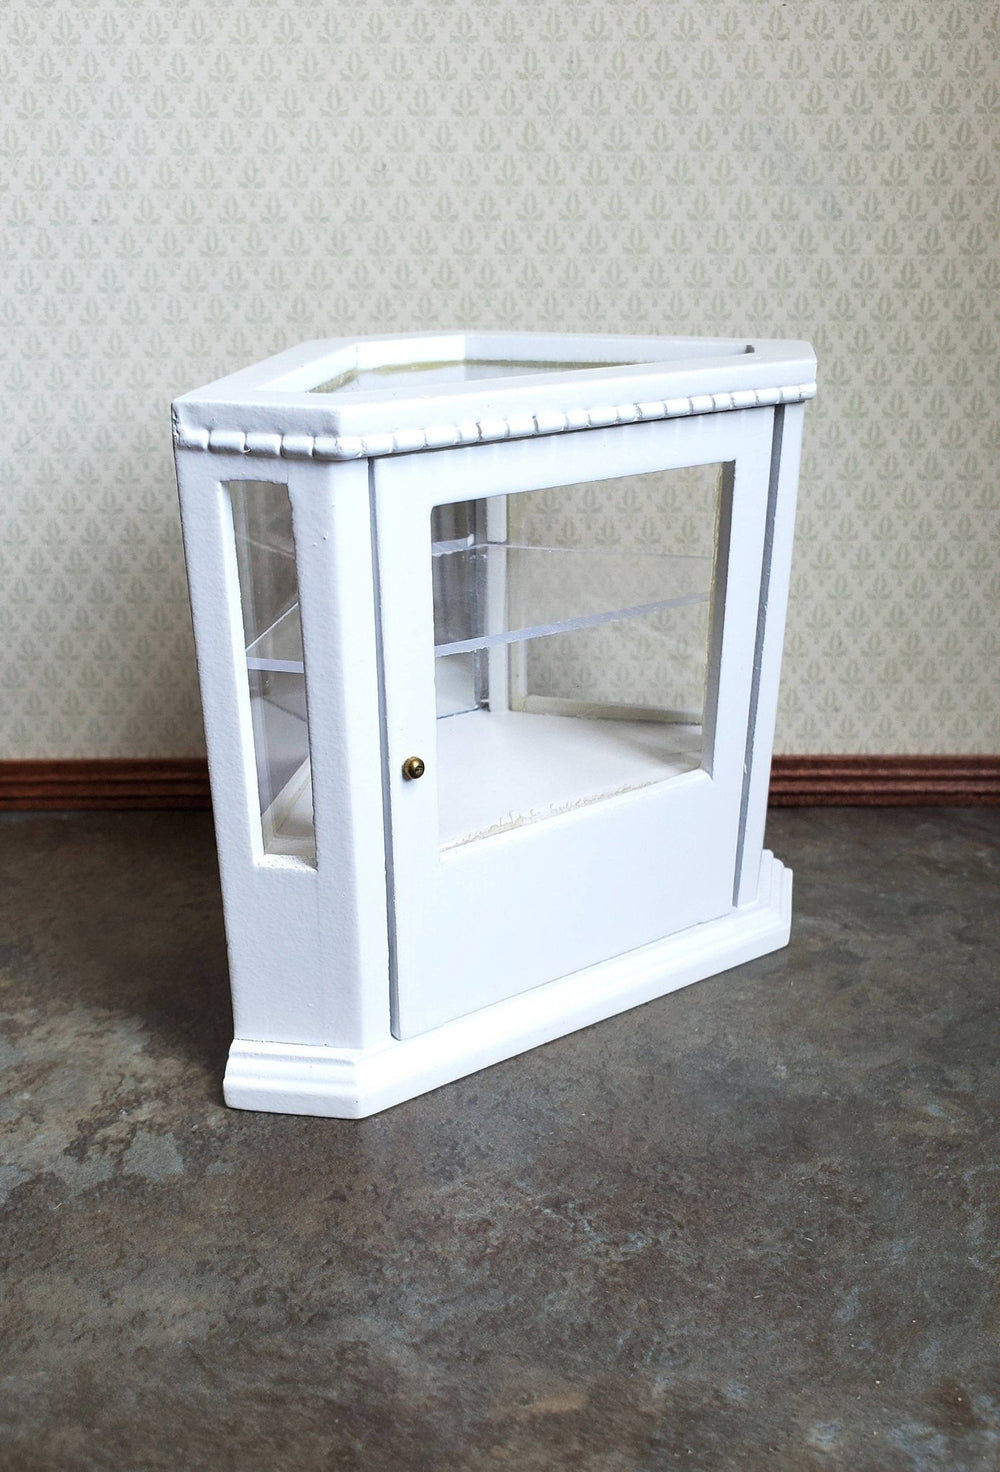 Dollhouse Miniature Corner Display Counter for Bakery Store or Shop 1:12 Scale Furniture White - Miniature Crush